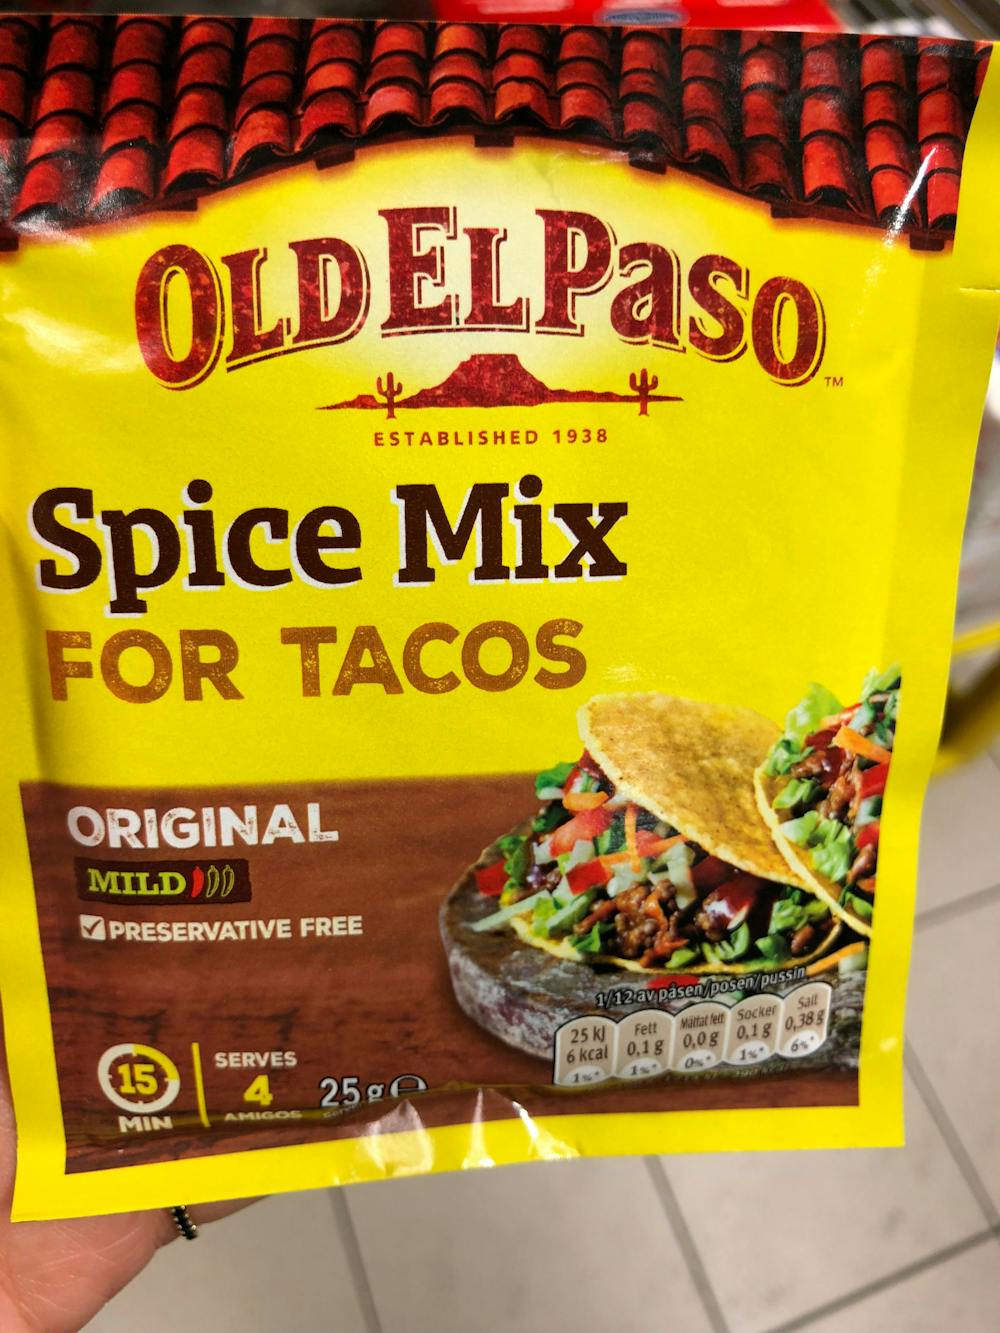 Spice mix for tacos, Old el paso